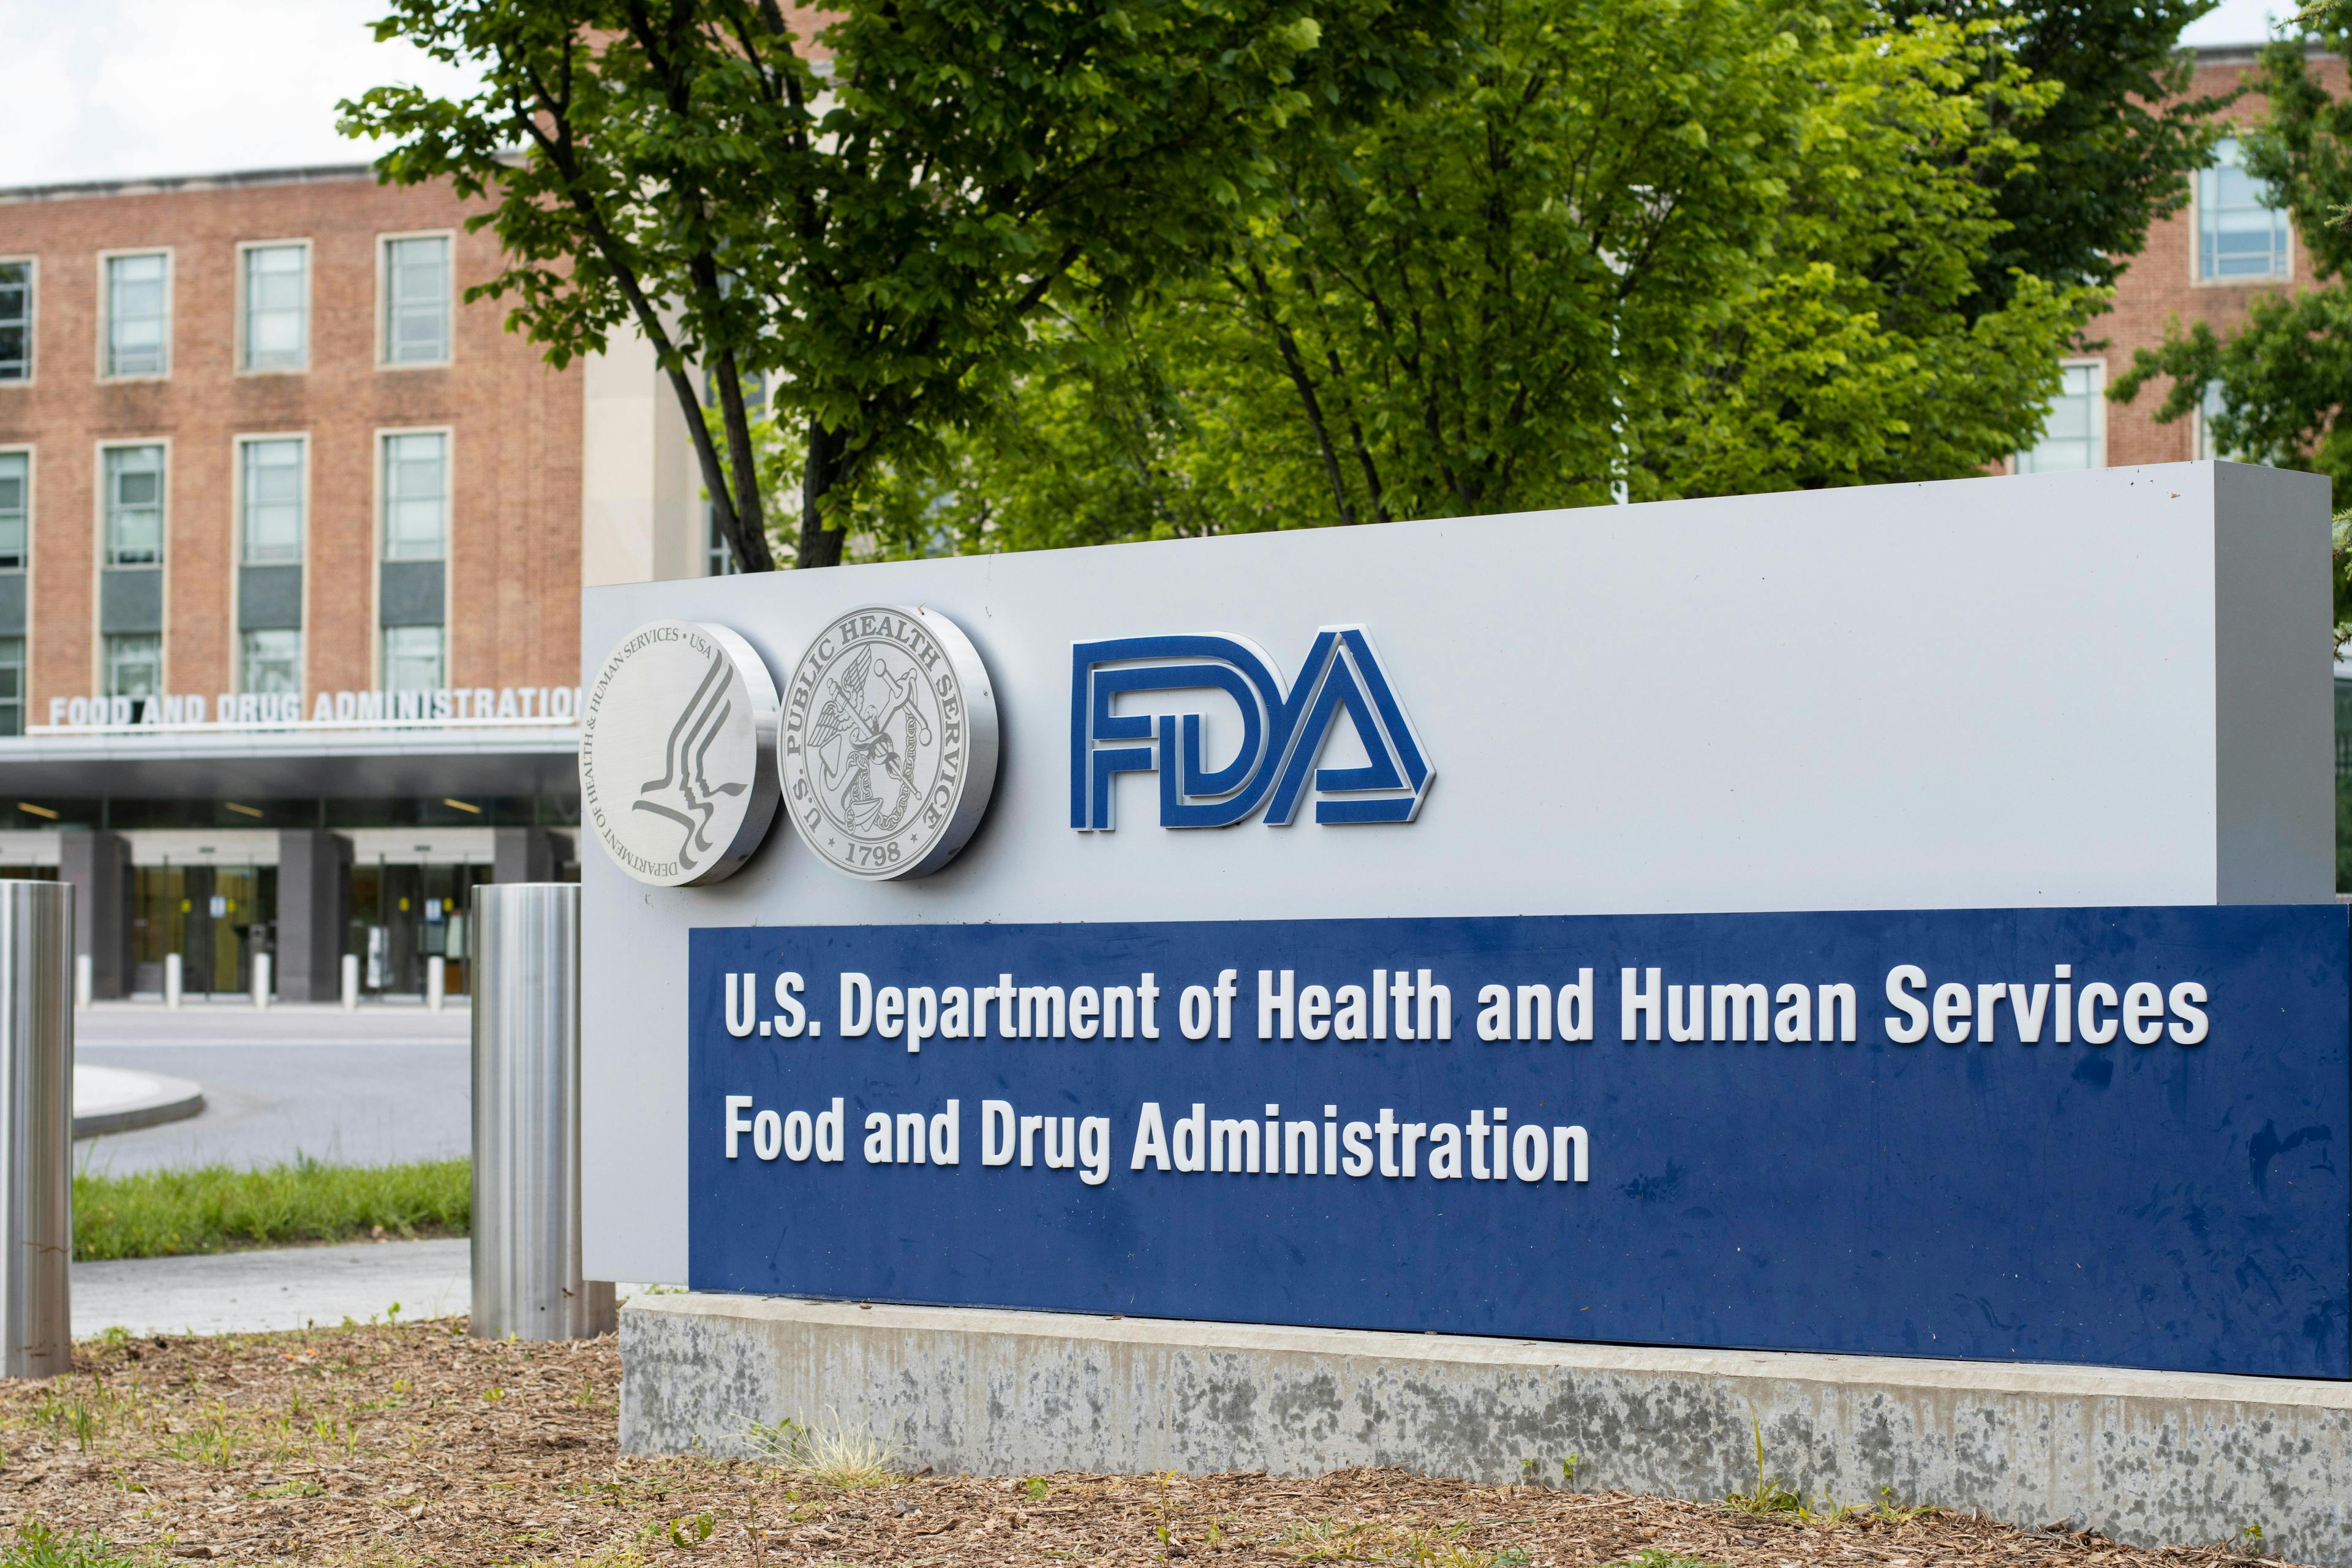 FDA Roundup: Biosimilars, Boxed Warning Added for CAR T-Cell Therapies